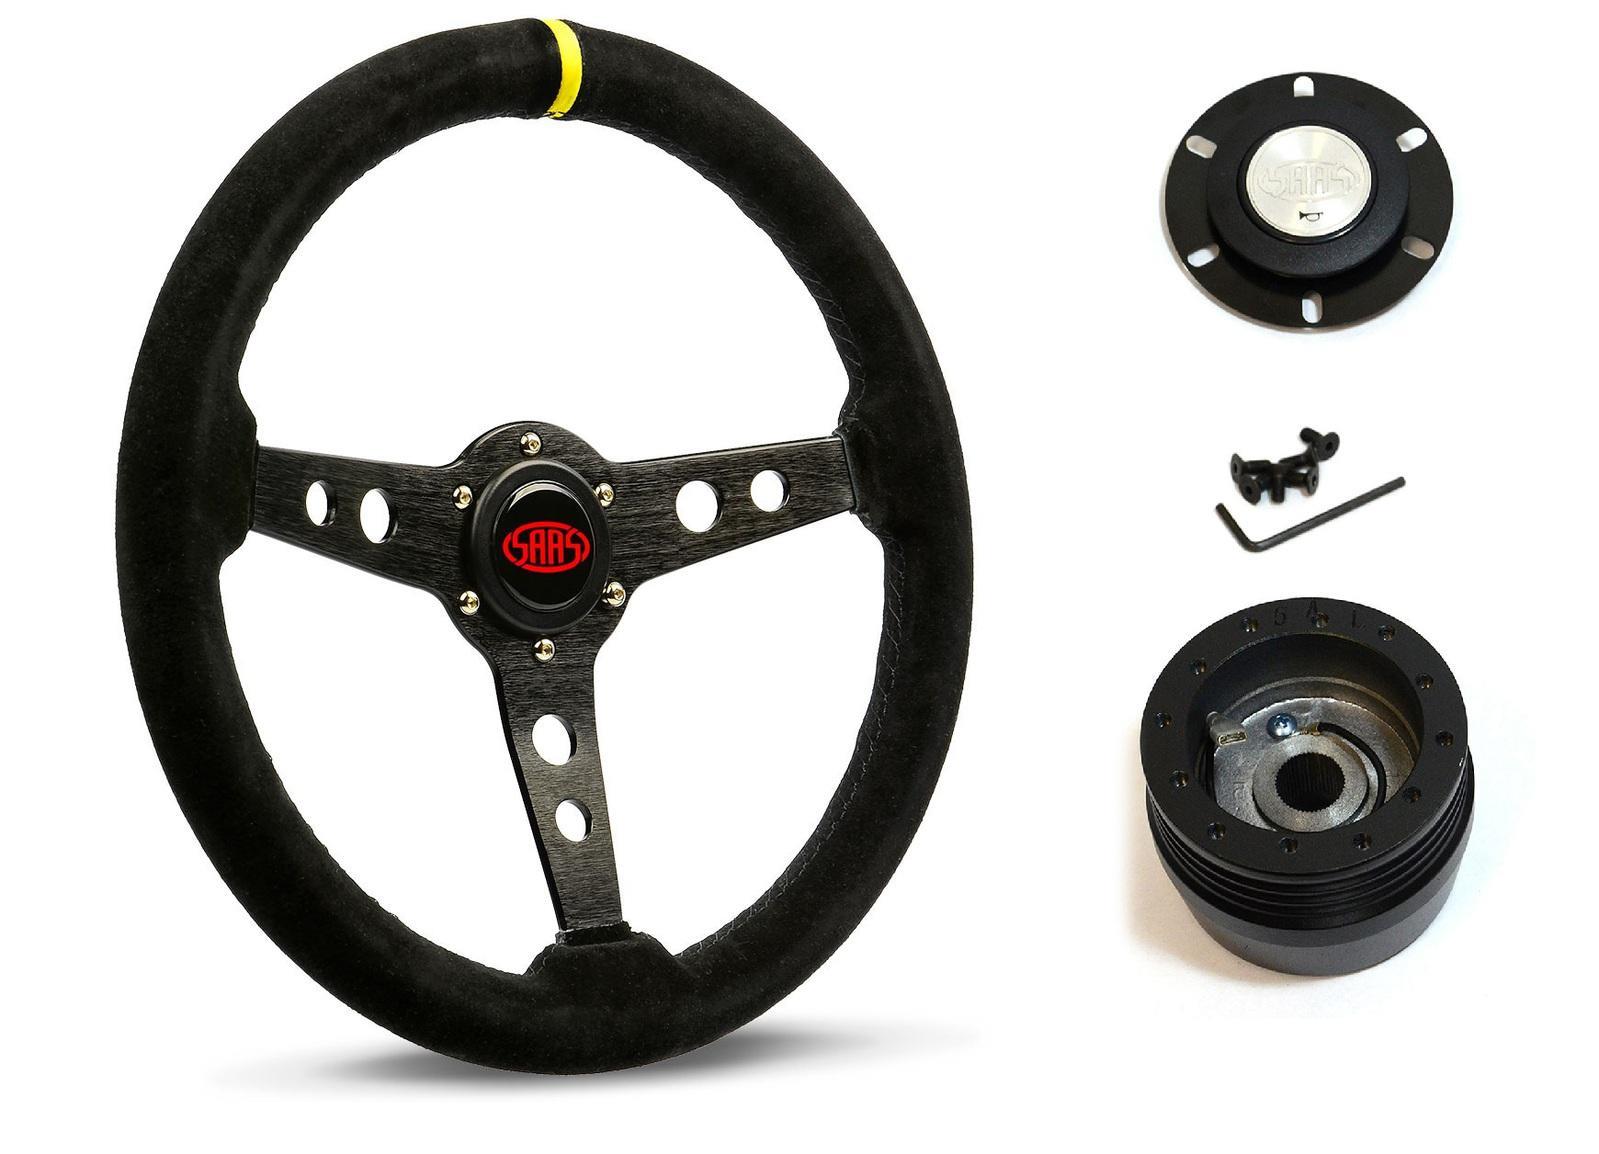 SAAS Steering Wheel Suede 14" ADR Retro Black Spoke + Indicator SW616OS-S and SAAS boss kit for Ford Corsair All Models 1988-1996